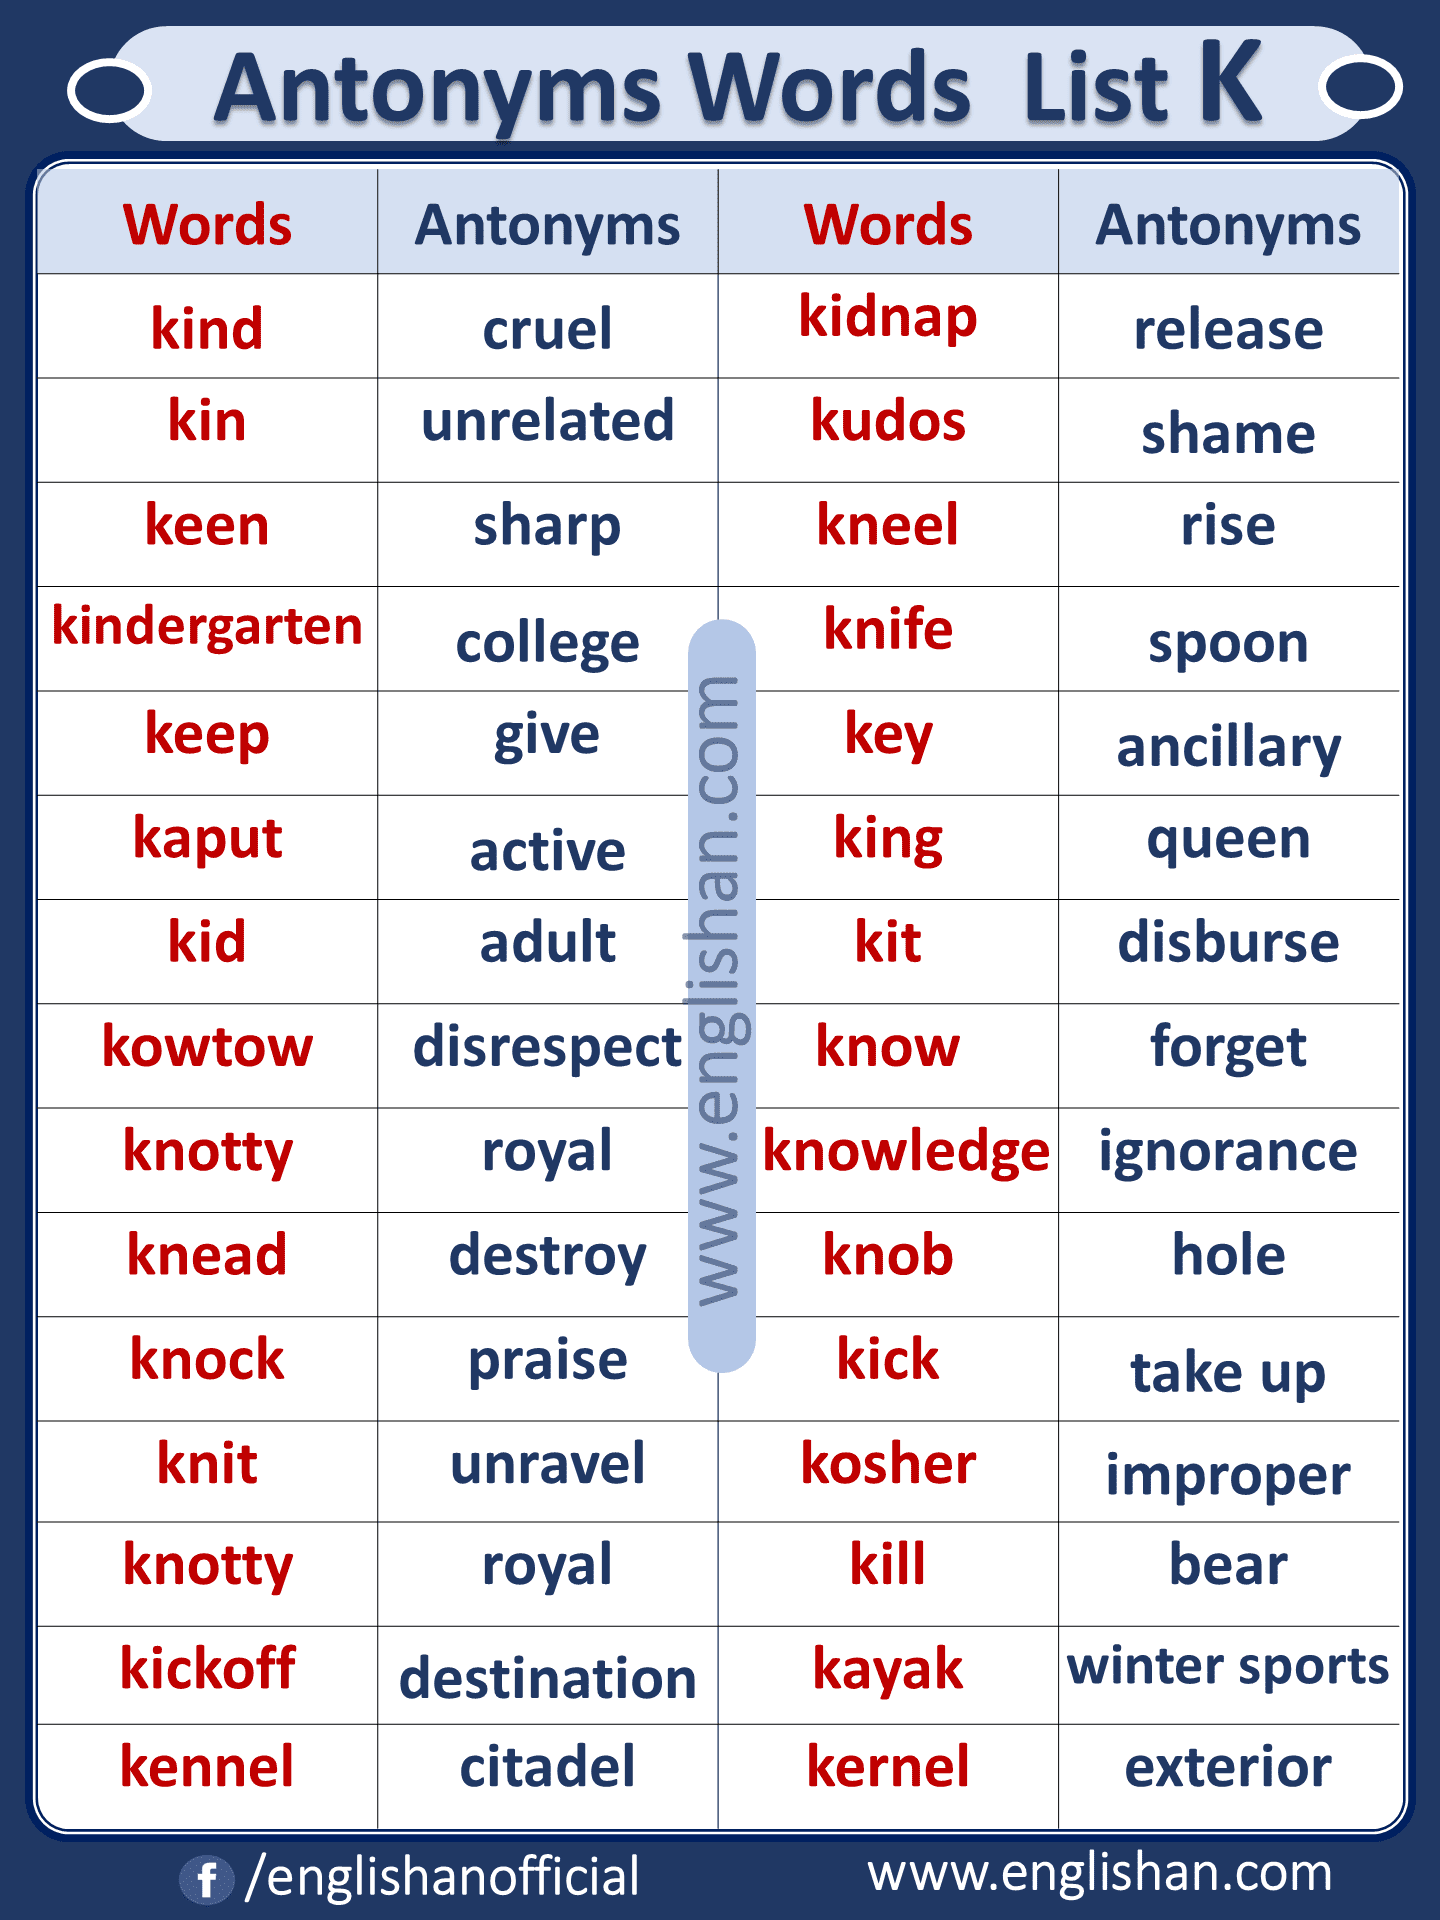 give antonym for the following word keen